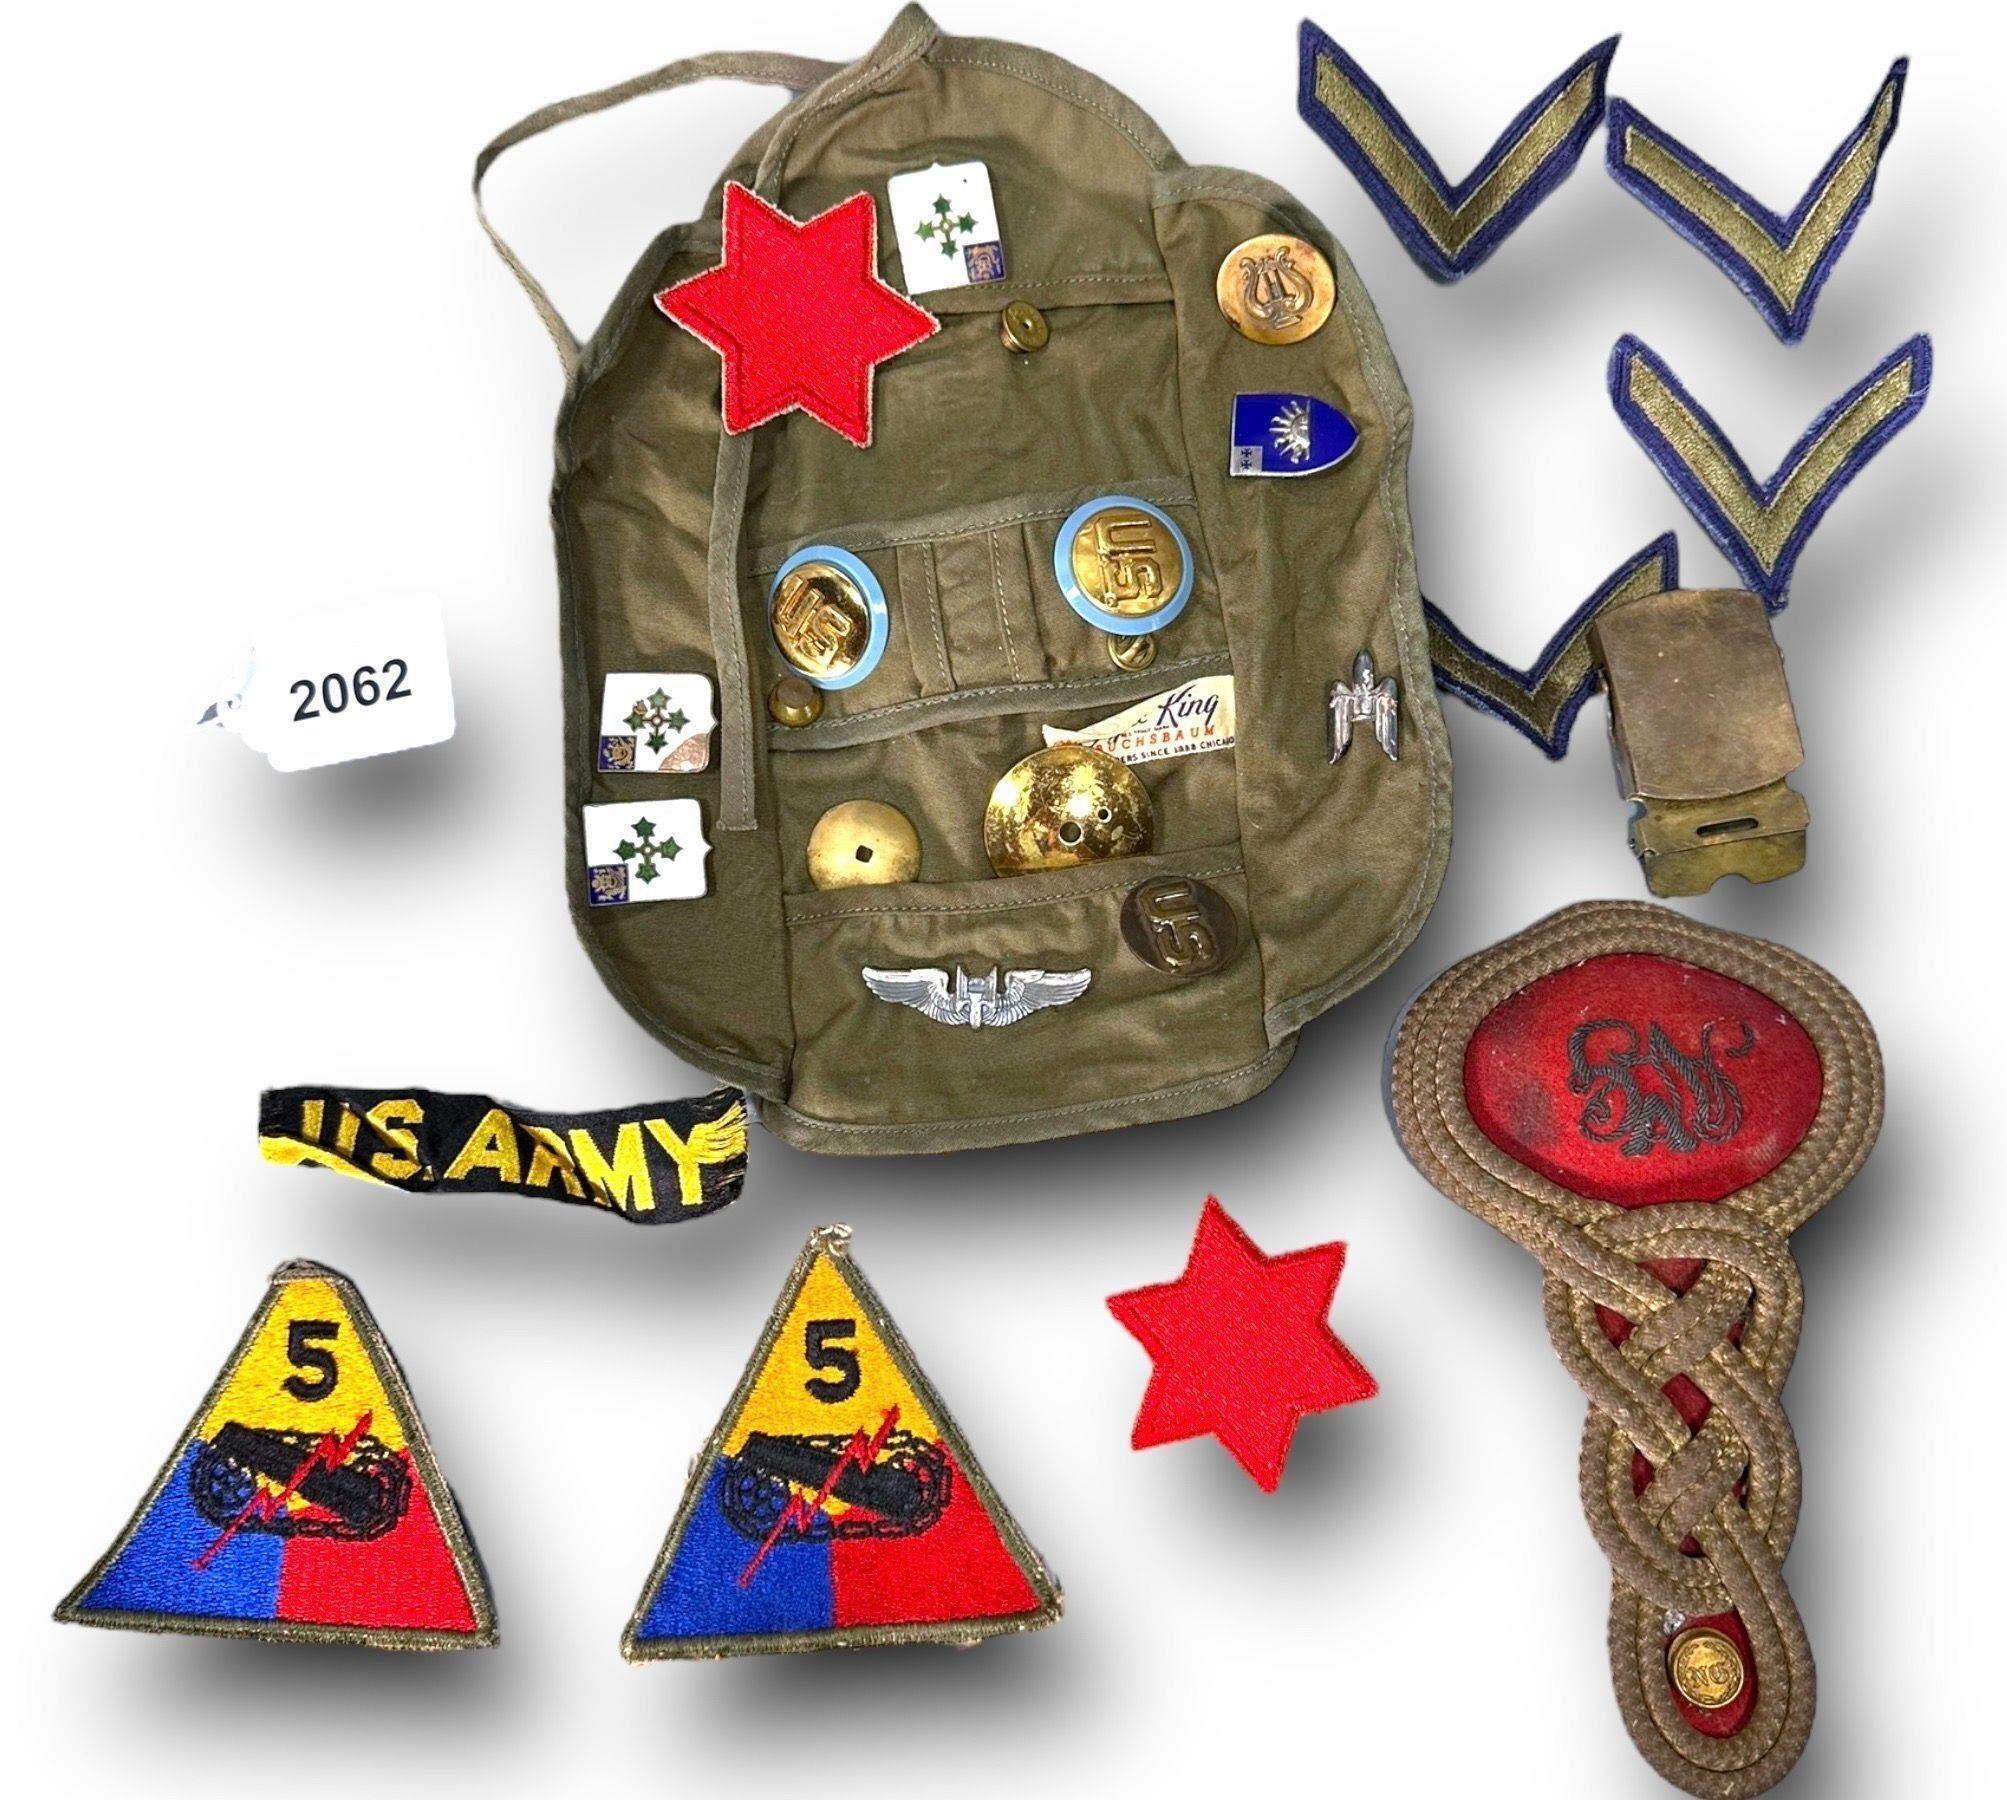 Atq. 5th Armored Div. Patches, Pins, Rucksack